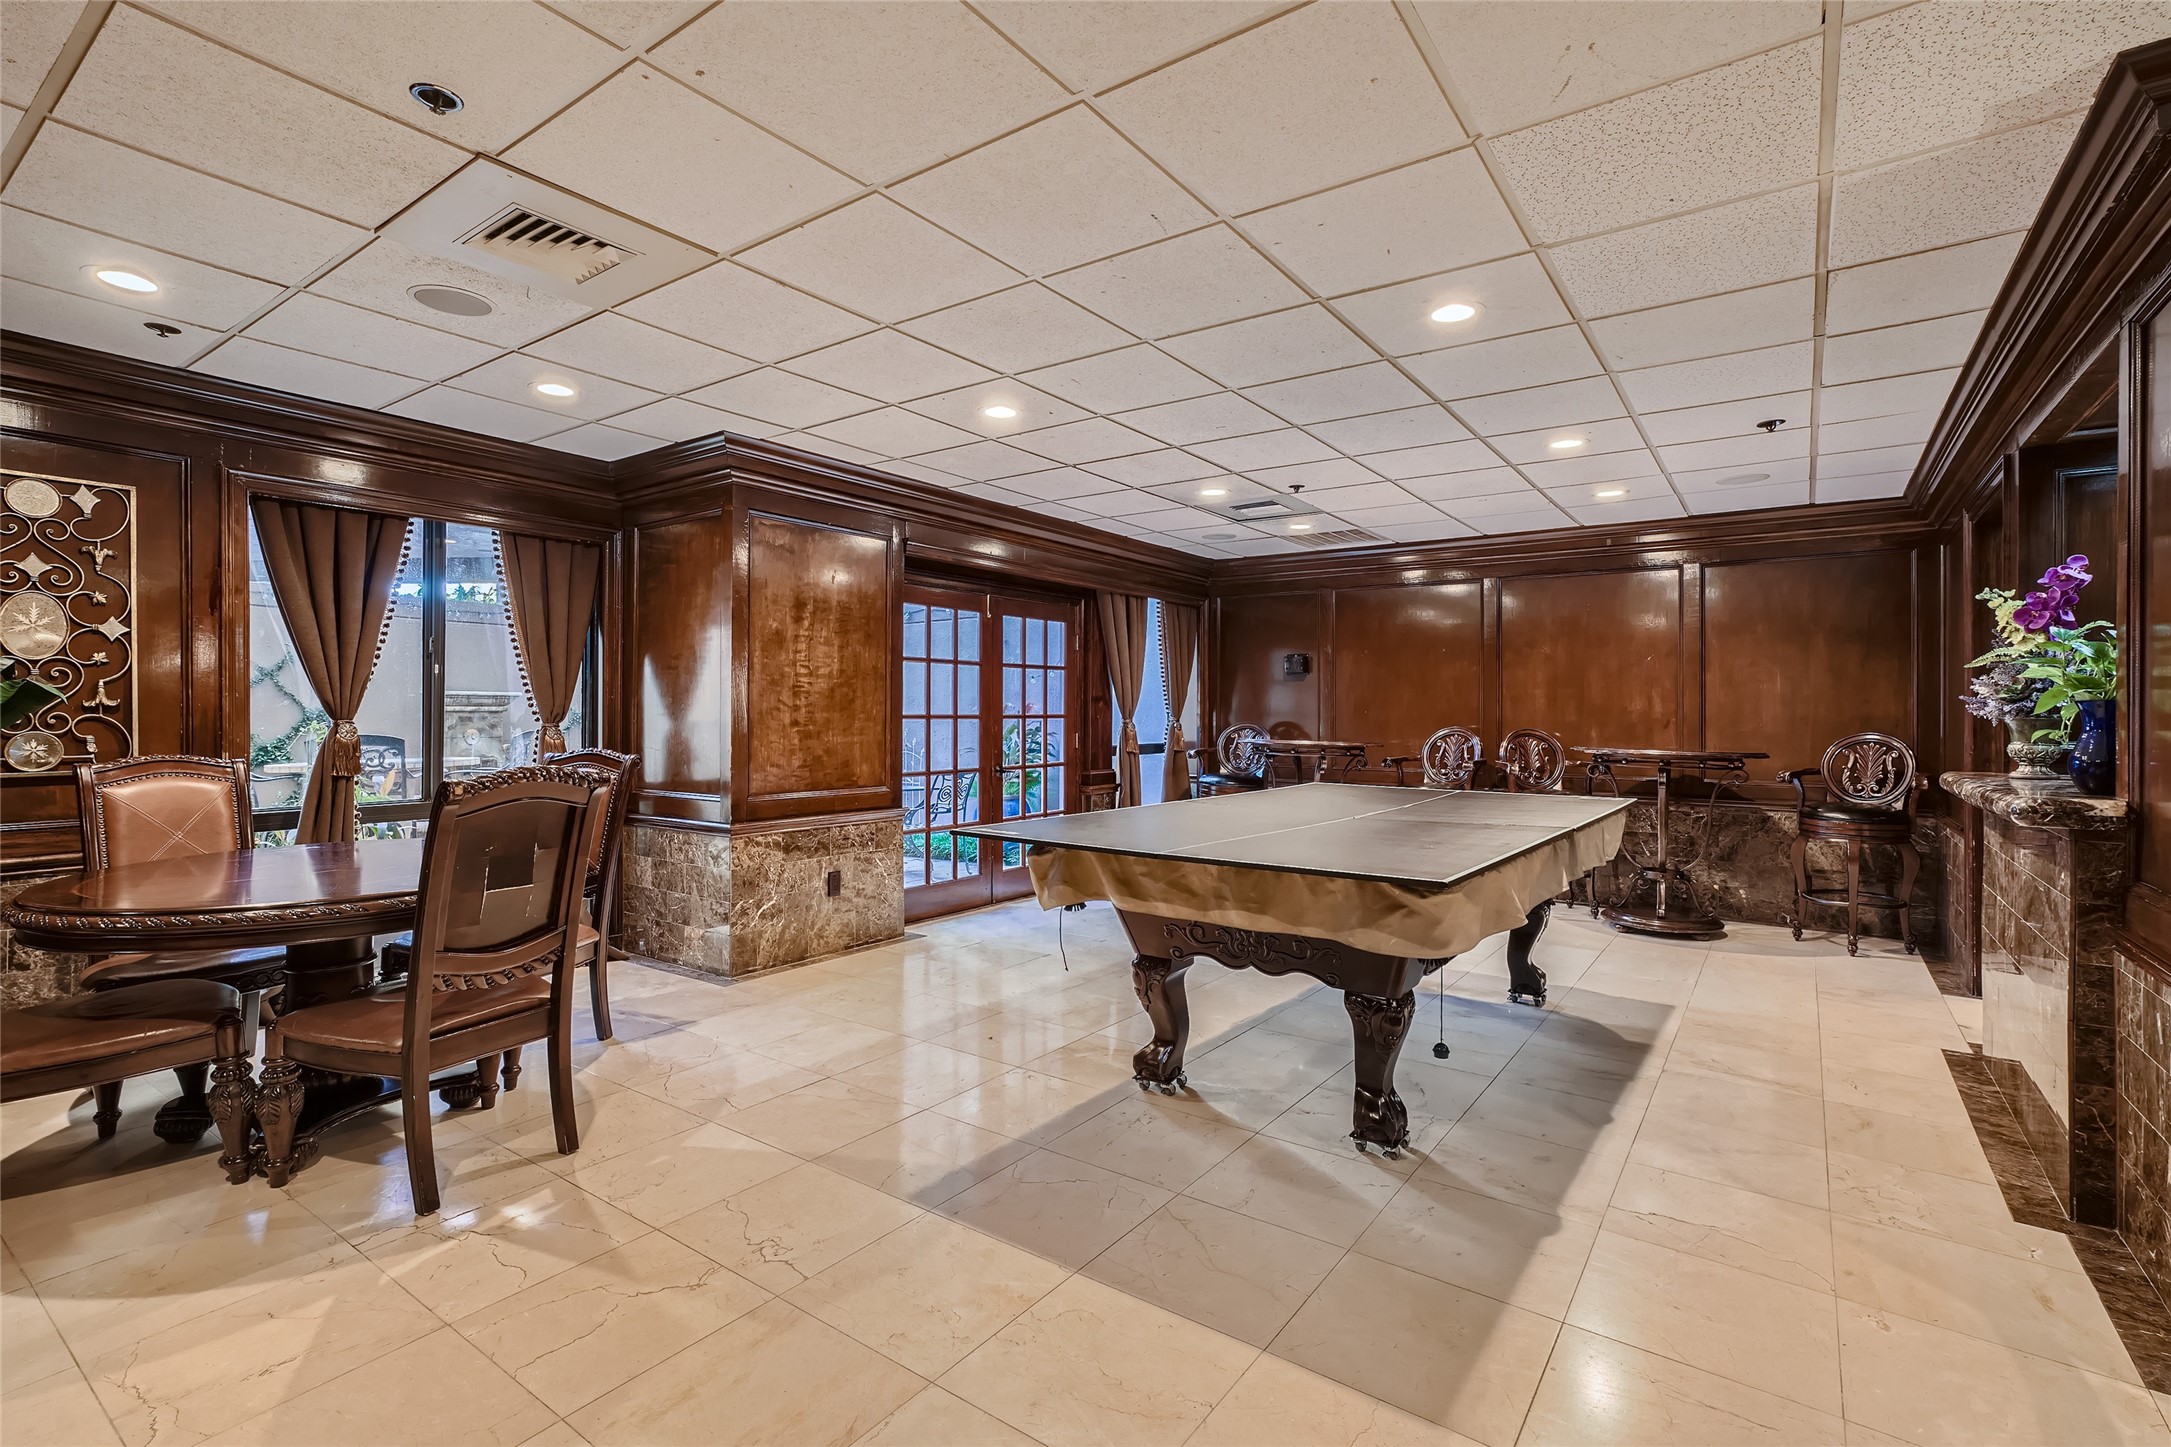 Entertain and unwind in style in the game room, complete with a lounge area, a wet bar, and a table for a game of cards.